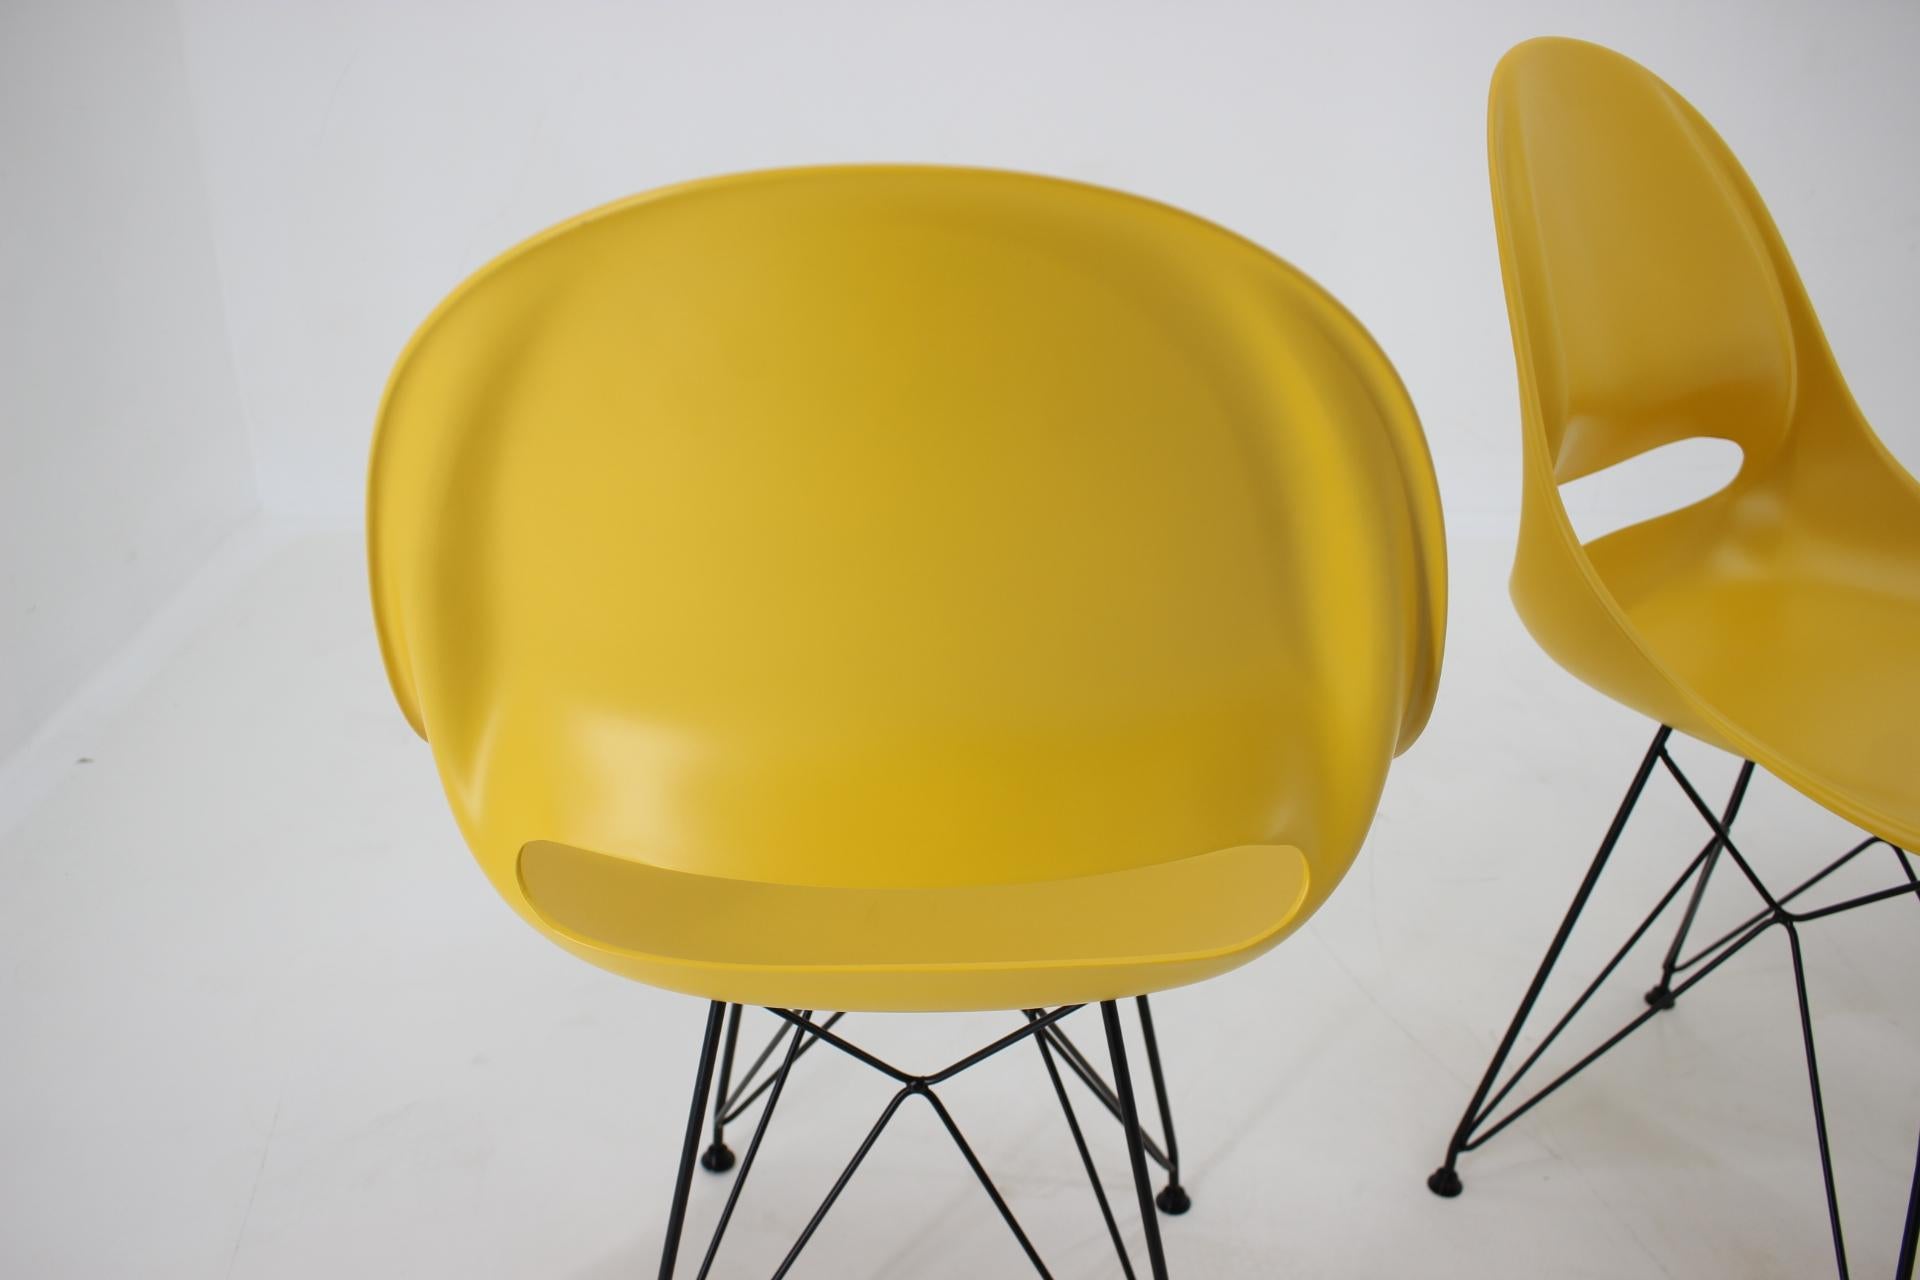 Czech Set of 4 Midcentury Yellow Design Fiberglass Dining Chairs by M.Navratil, 1960s For Sale